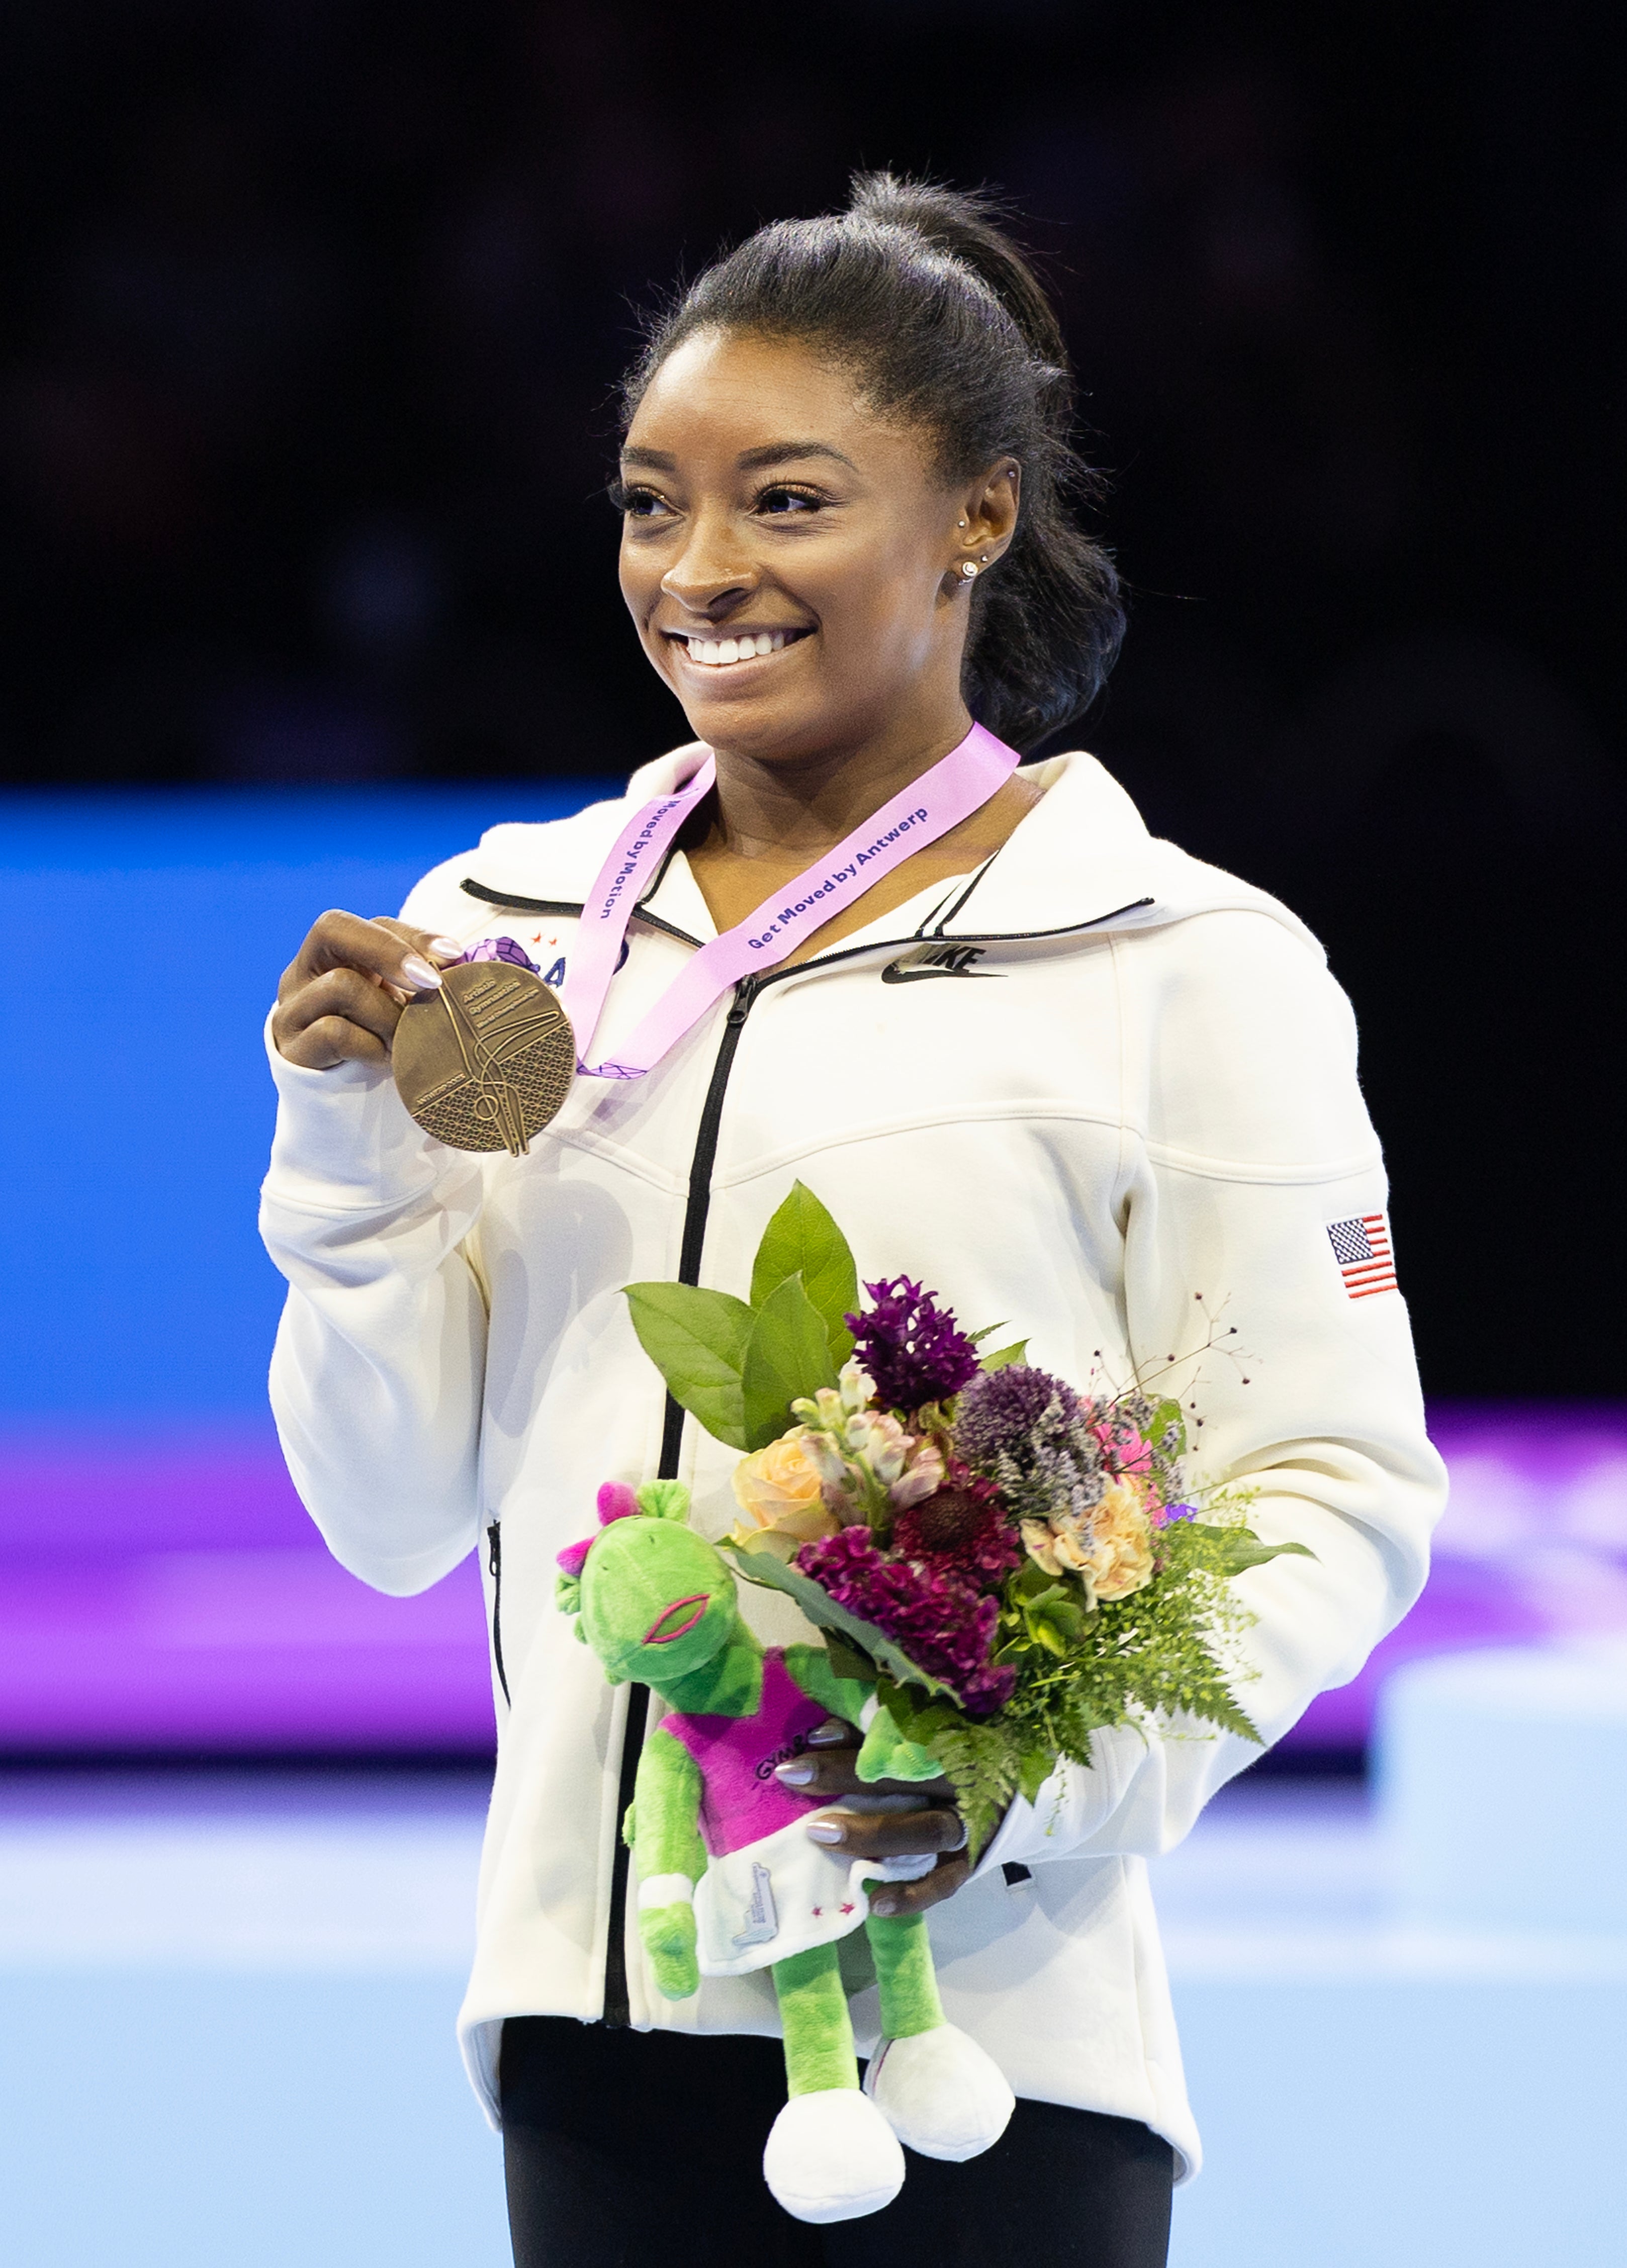 Simone holding out her medal as she holds a bouquet of flowers at the Olympics